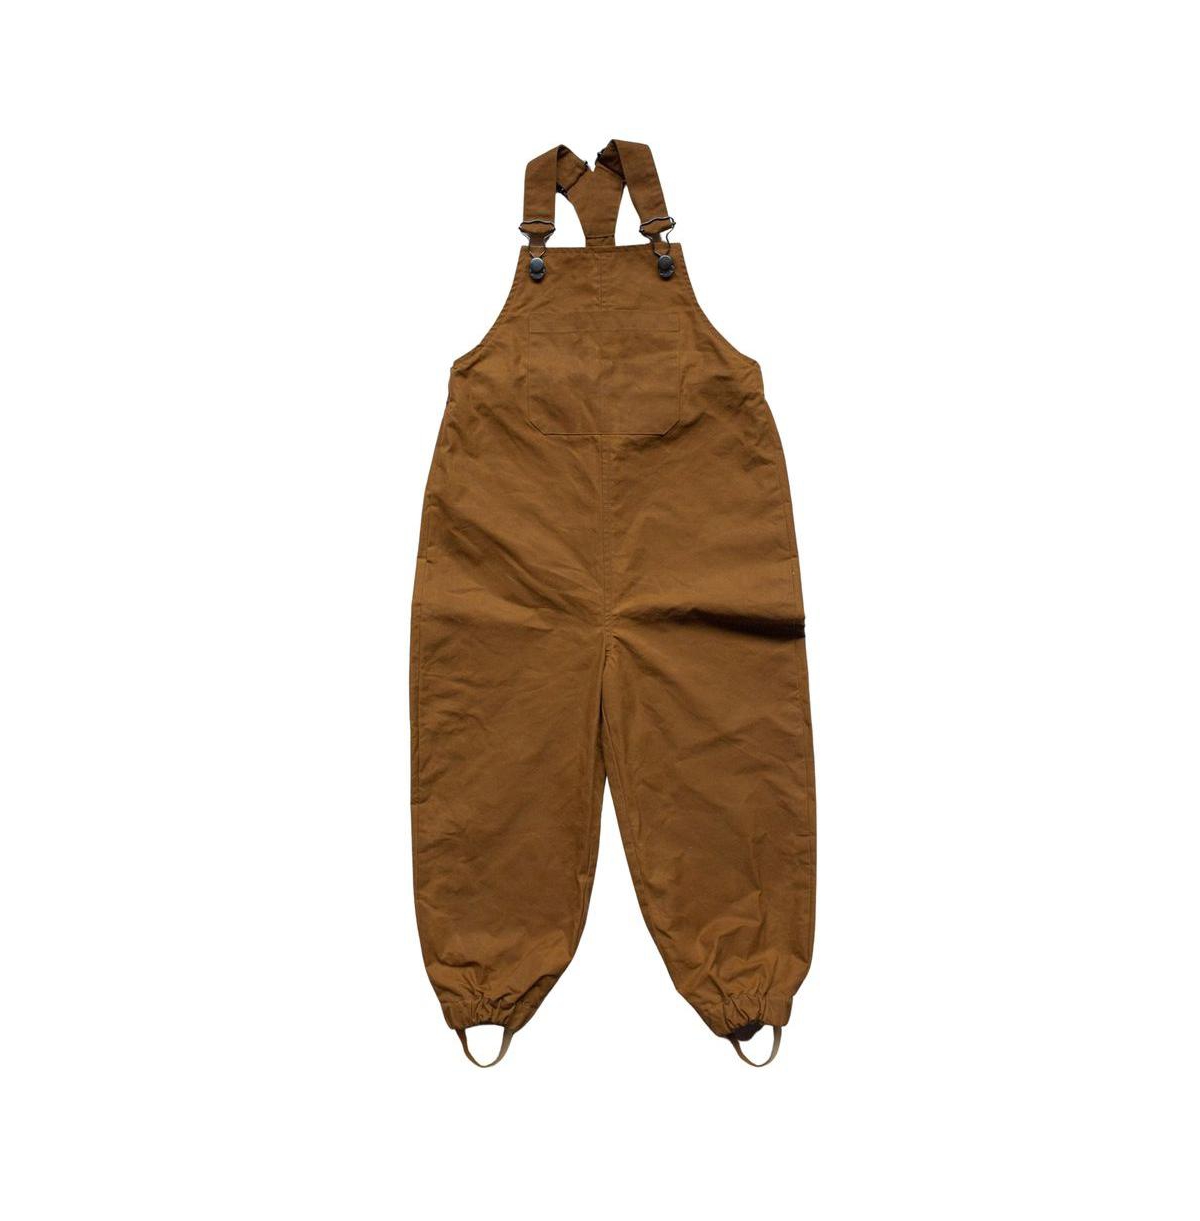 The Simple Folk Child Boy And Child Girl Wind-proof And Water-resistant Linen Element Overall In Hazelnut